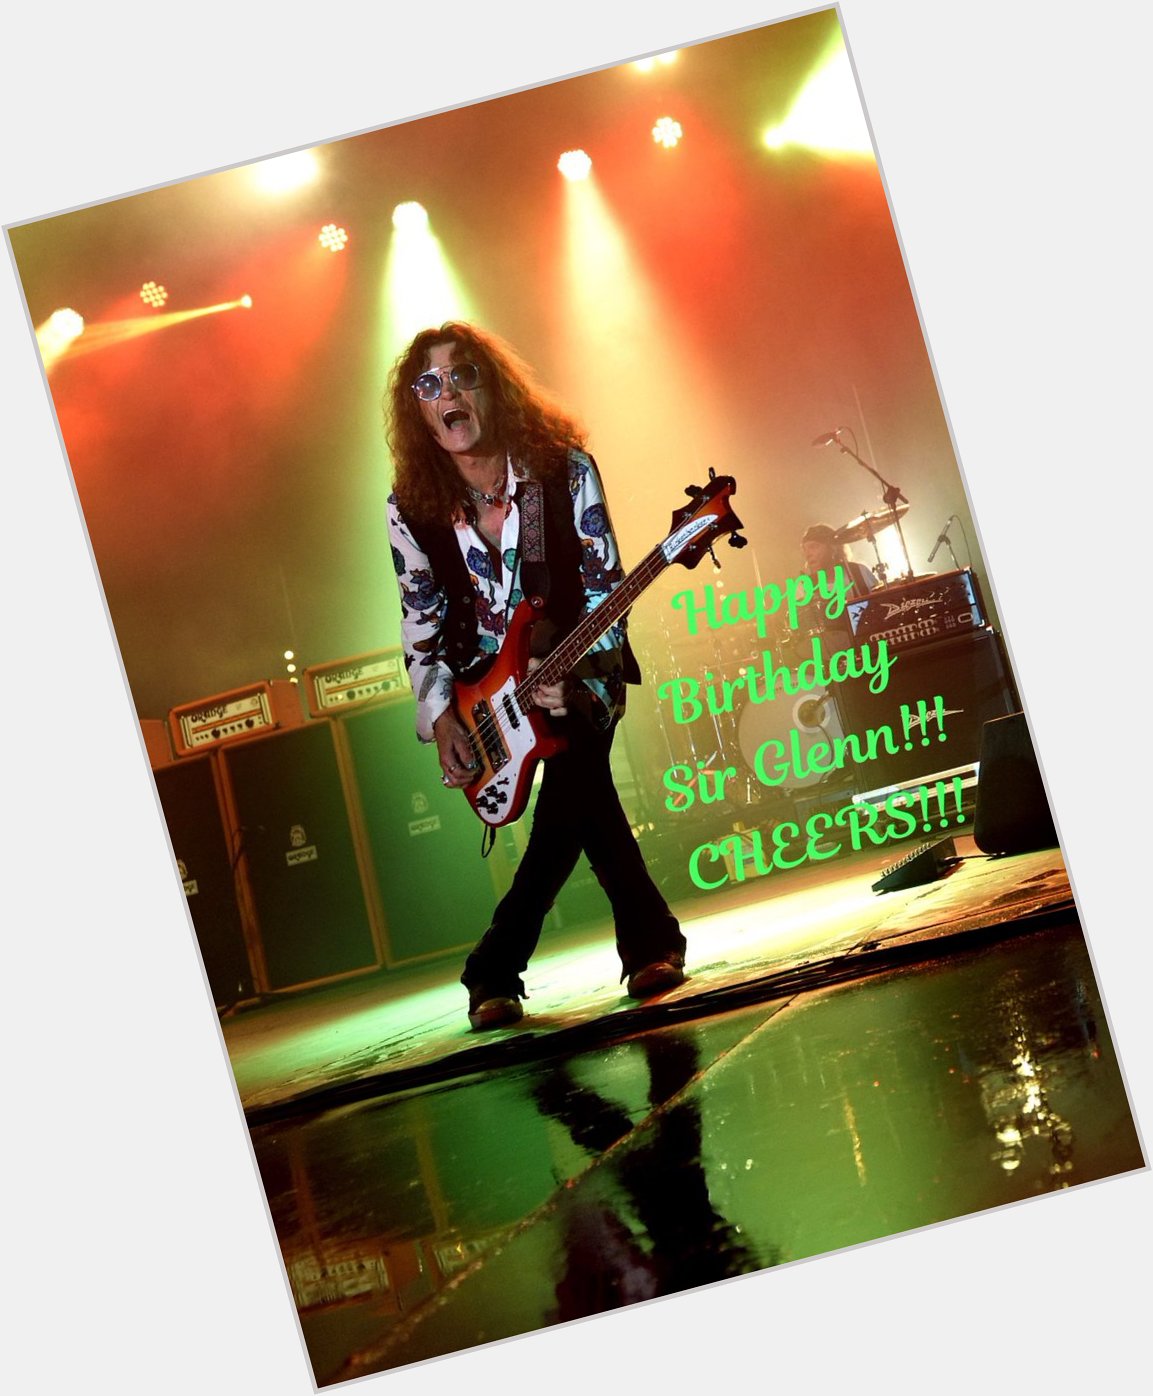 A Very BIG Happy Birthday wish today to Sir Glenn Hughes!!!
CHEERS My Friend!!!
All The Best!!! 